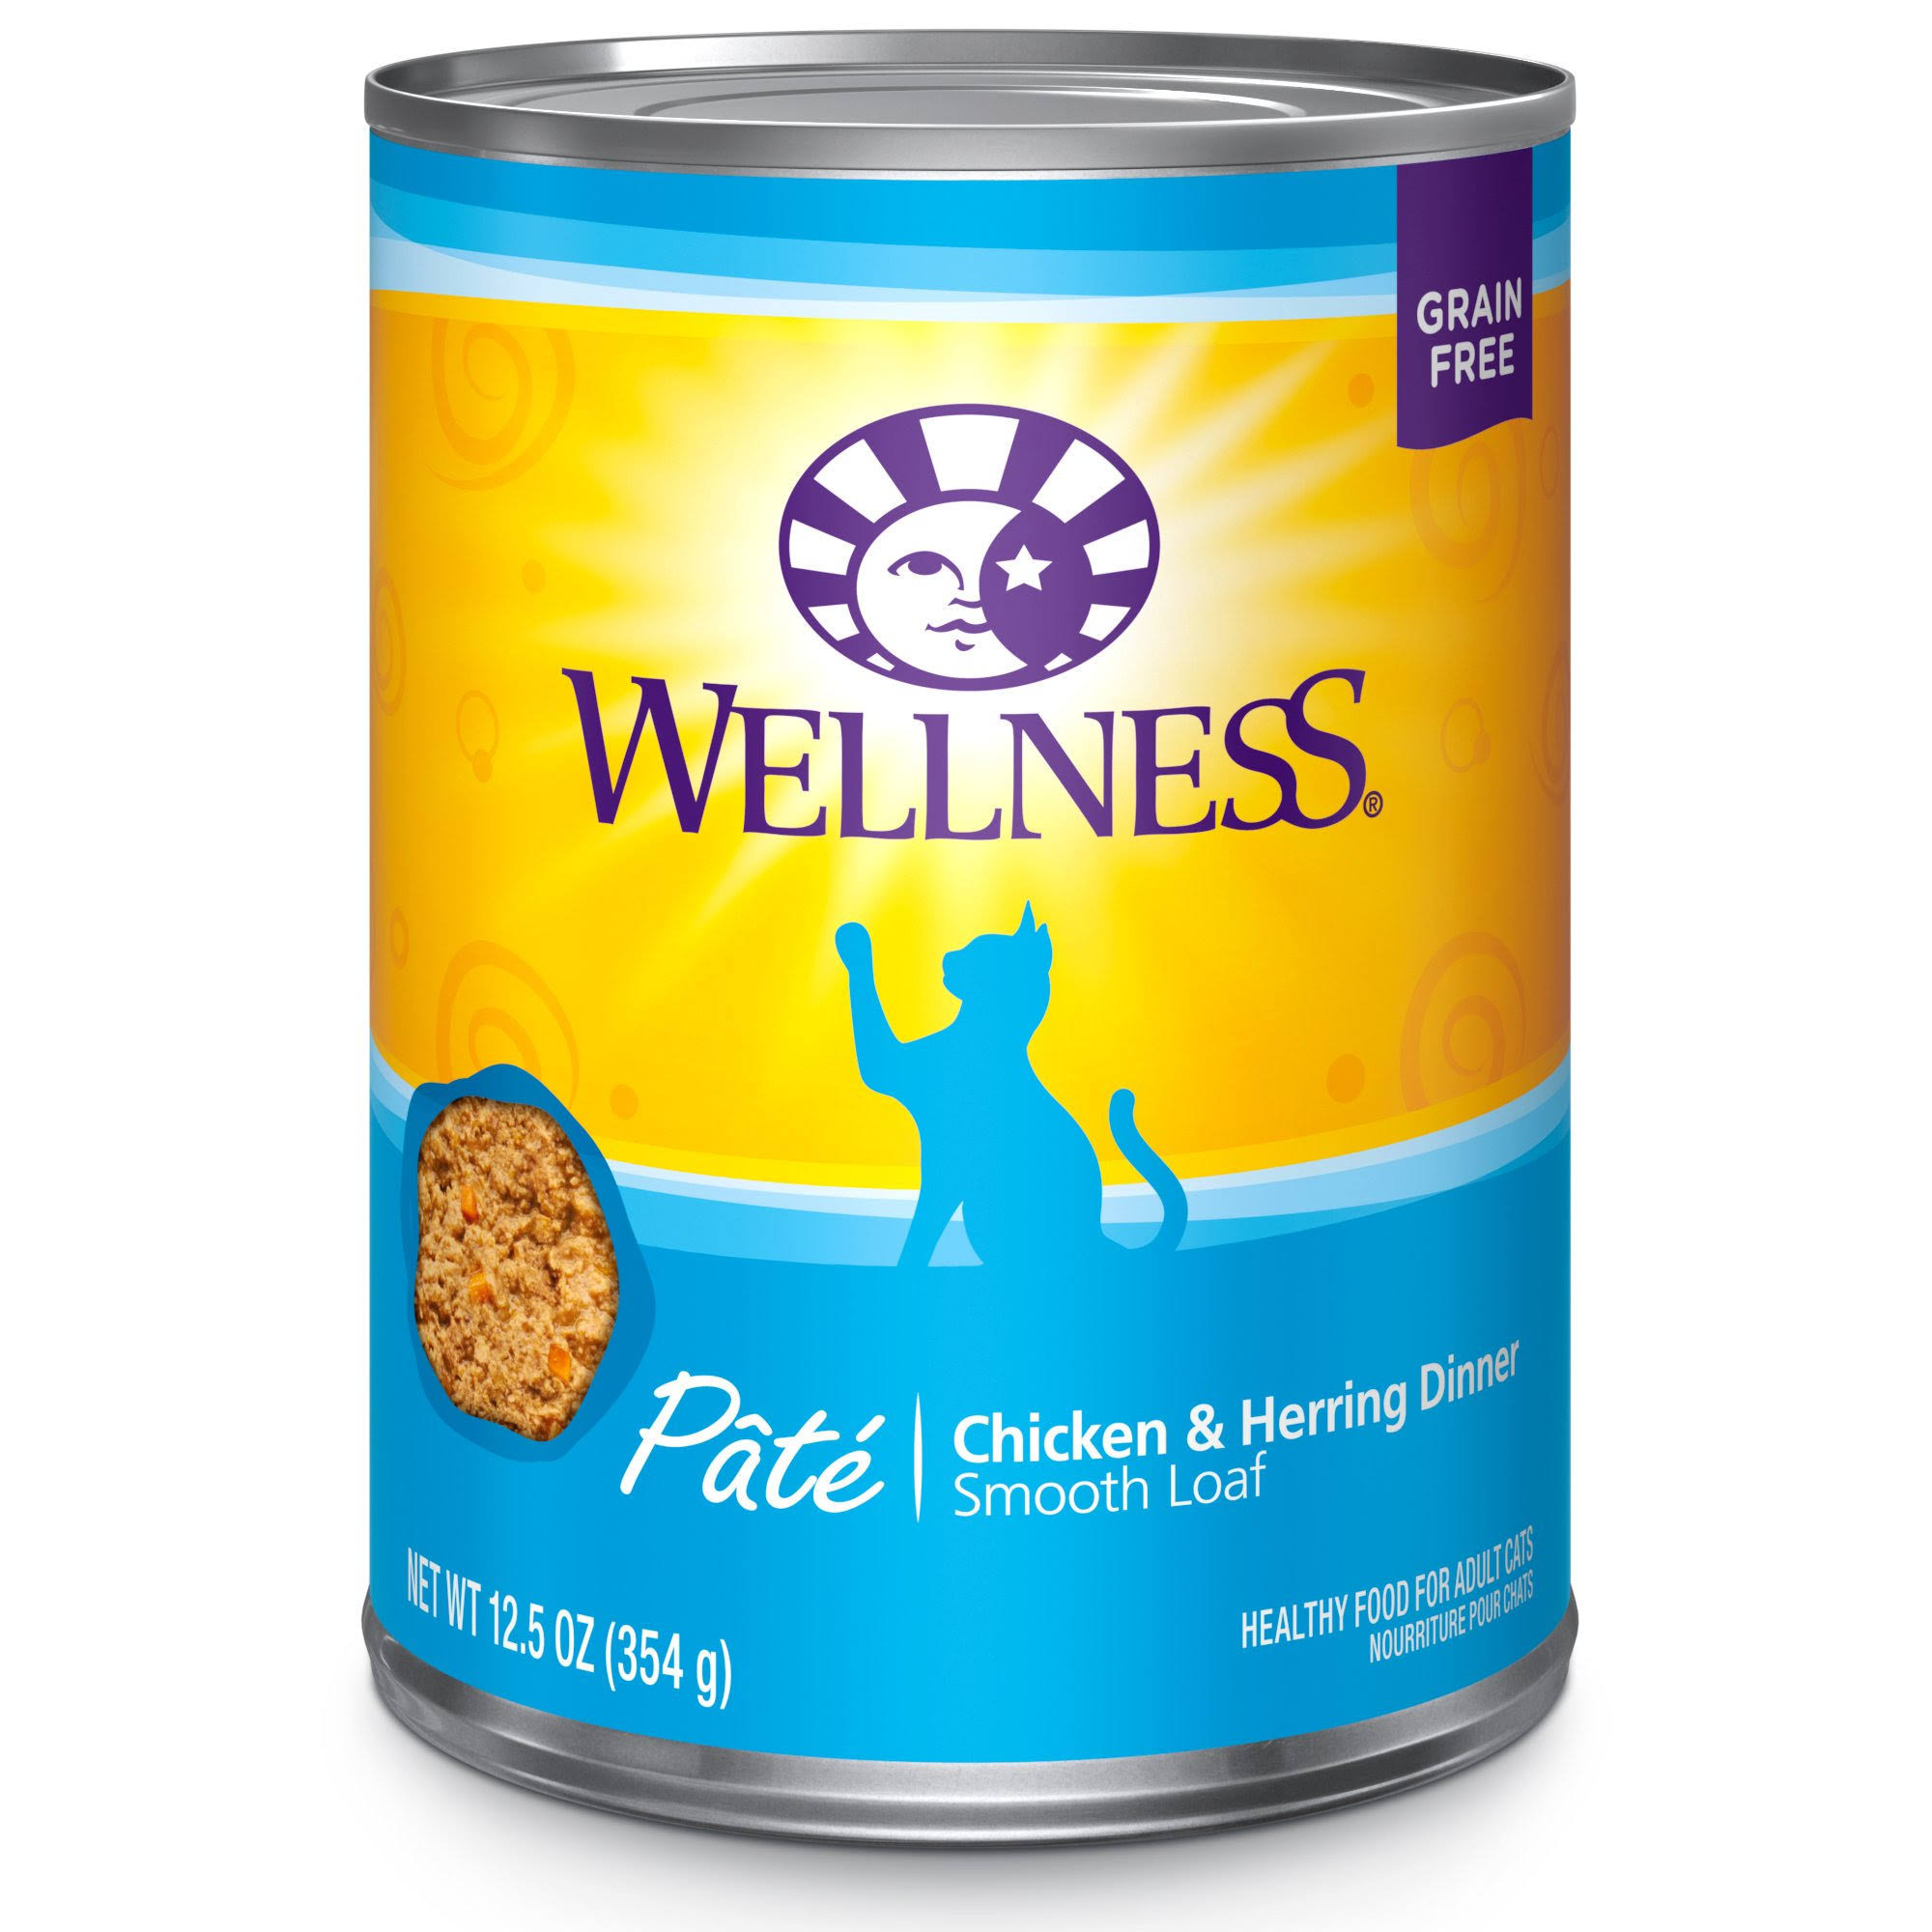 Wellness Complete Health Grain Free Natural Wet Canned Cat Food - Chicken & Herring, 12.5oz